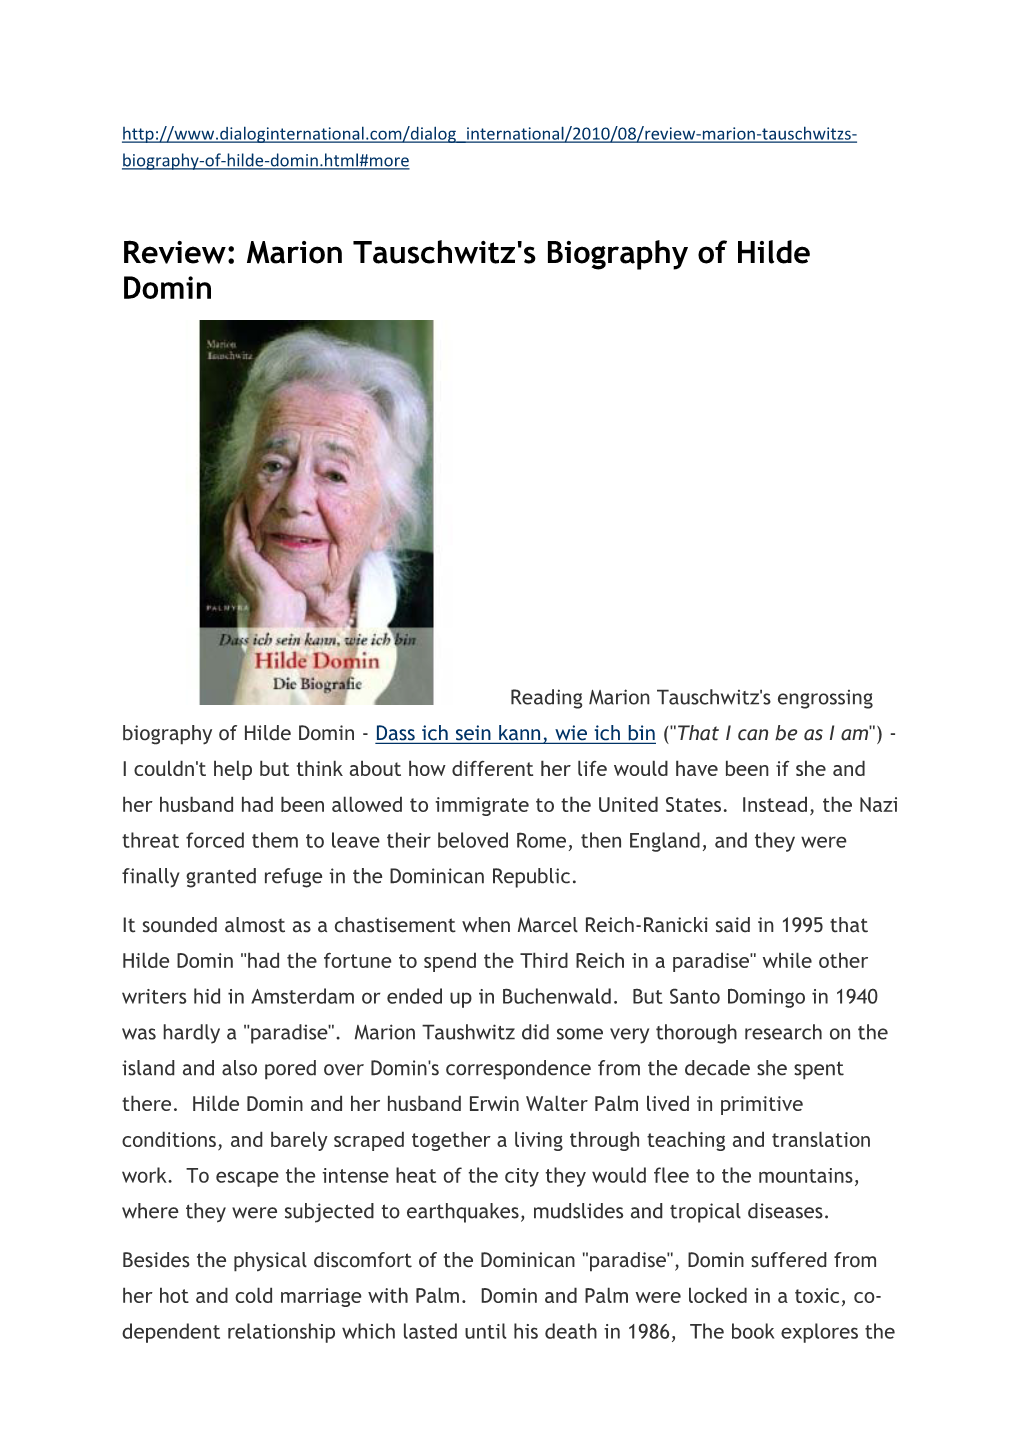 Review: Marion Tauschwitz's Biography of Hilde Domin